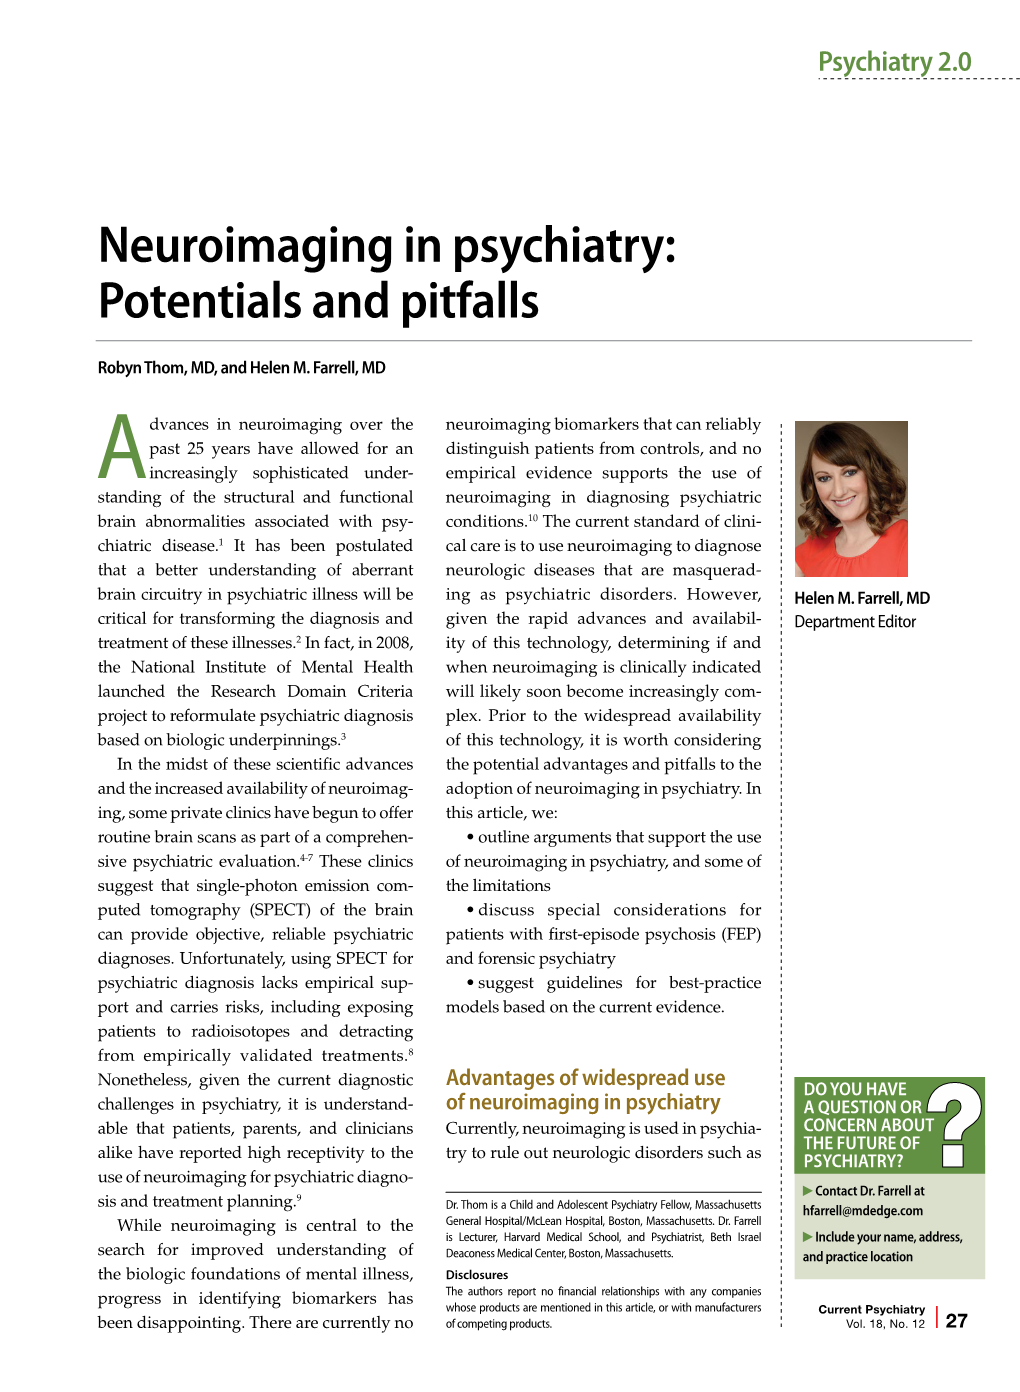 Neuroimaging in Psychiatry: Potentials and Pitfalls